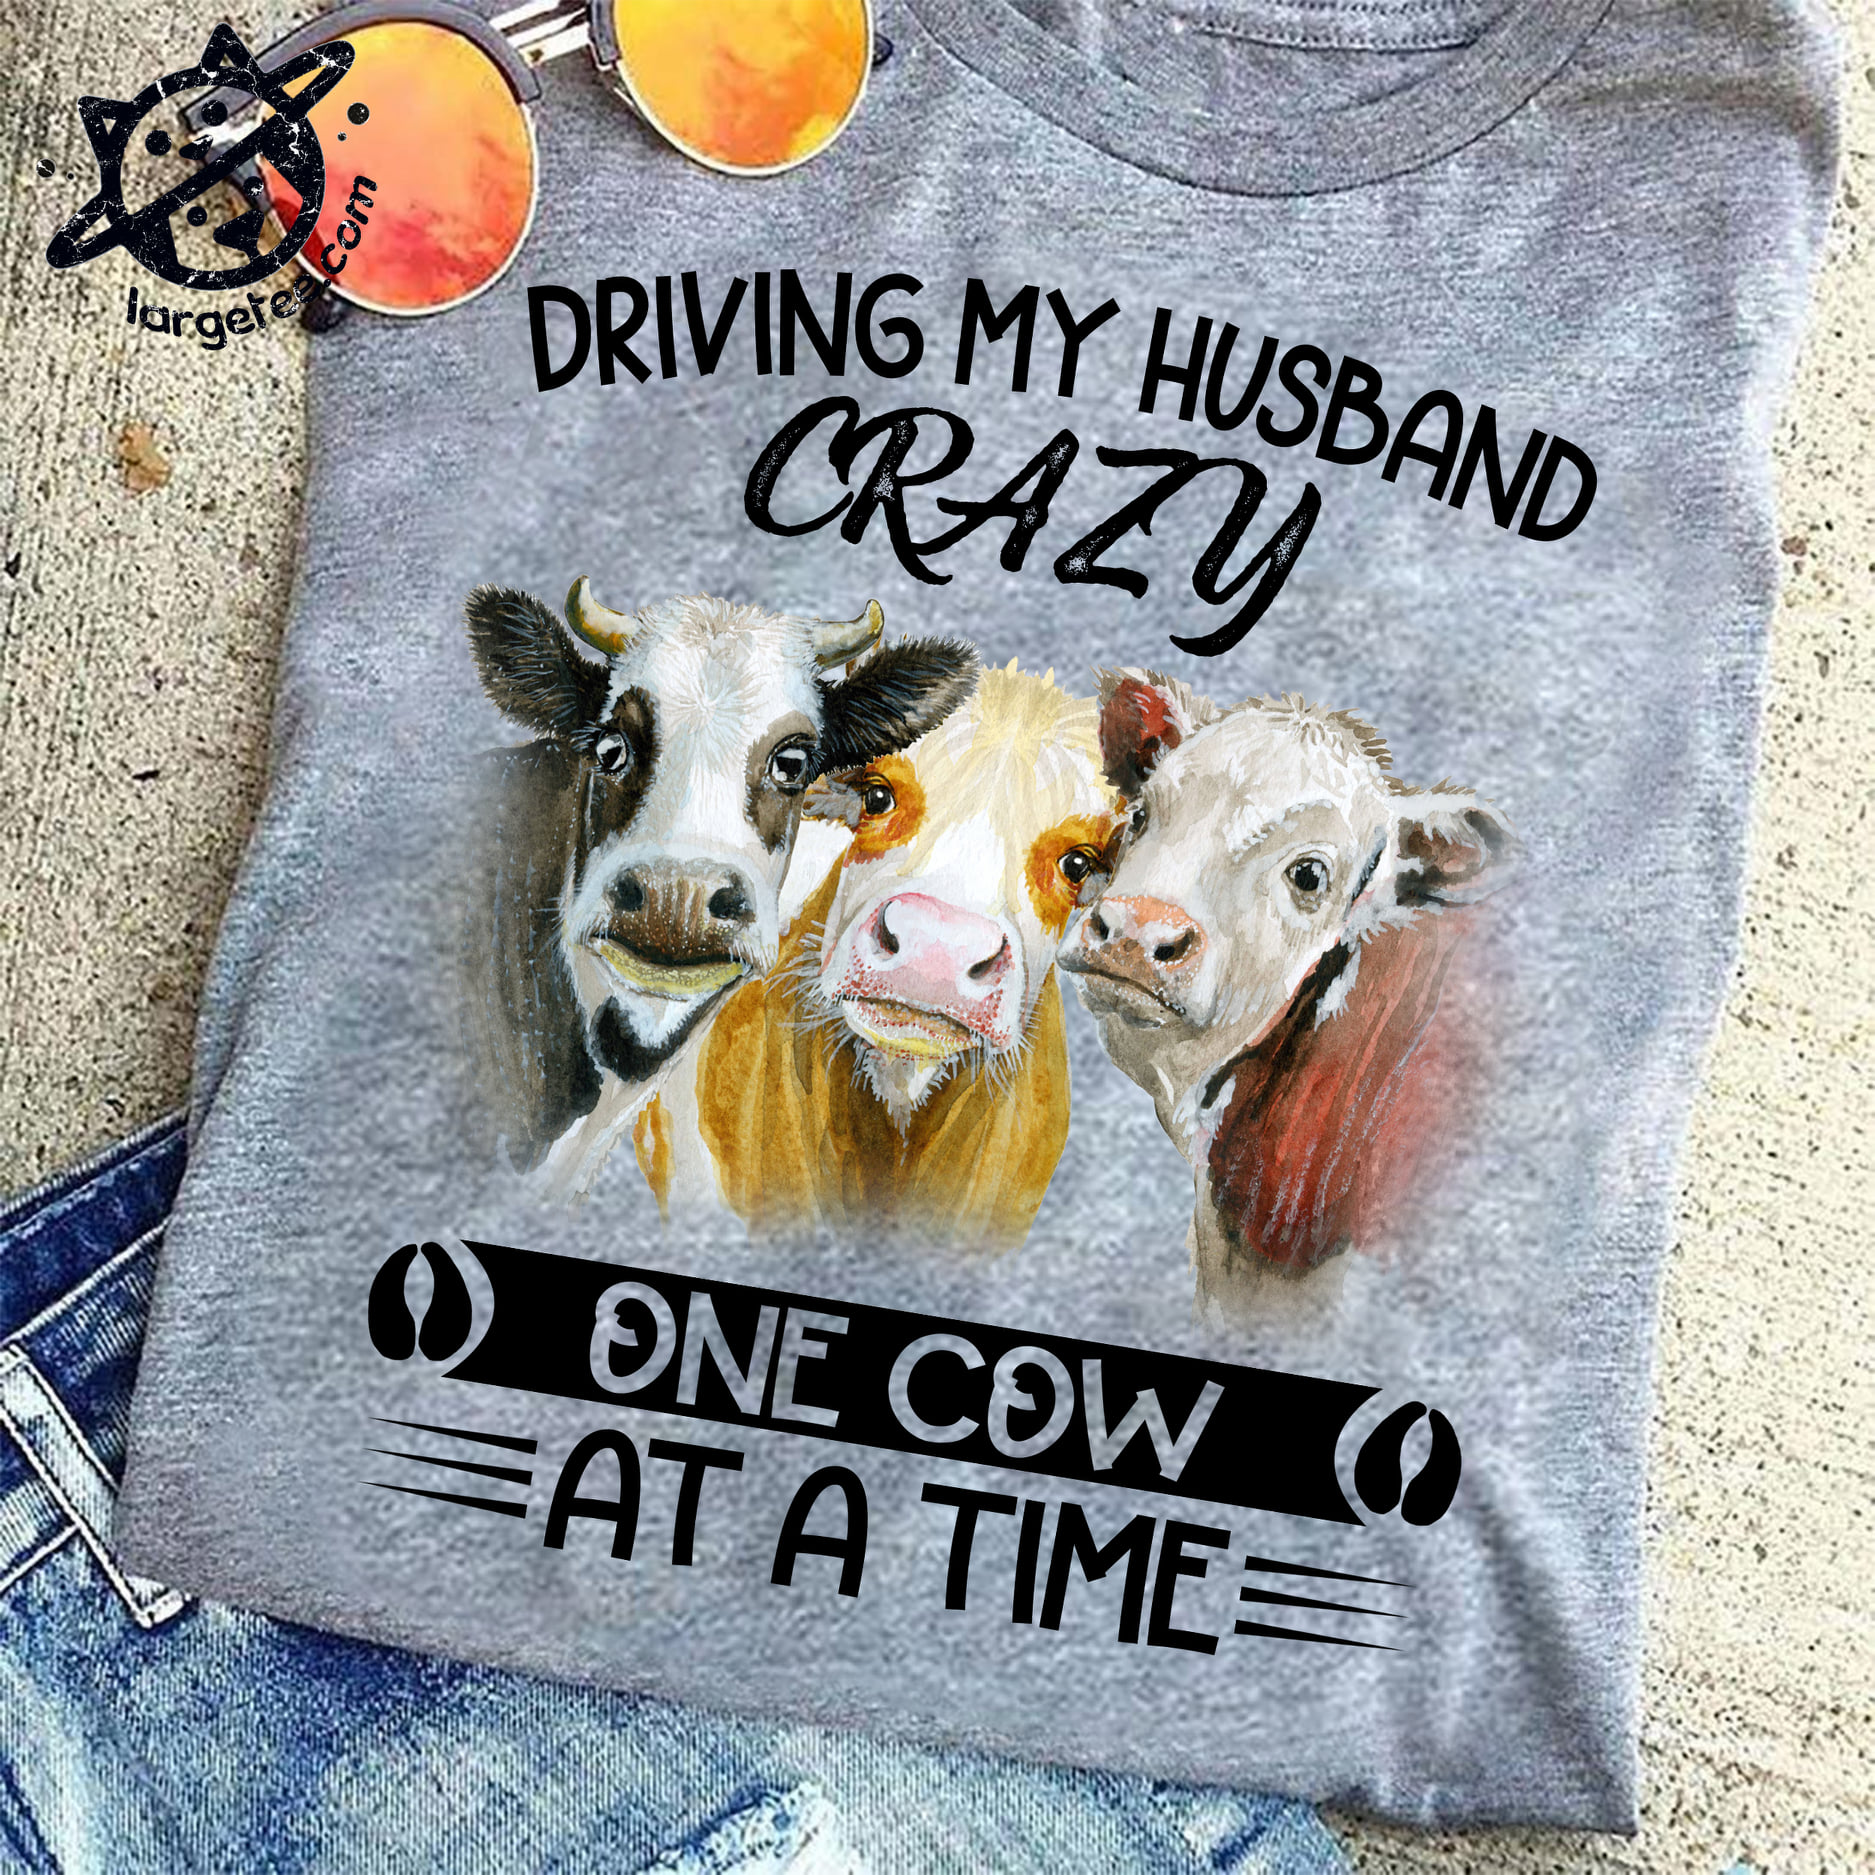 Driving my husband crazy, one cow at a time - Husband loves cow, husband and wife